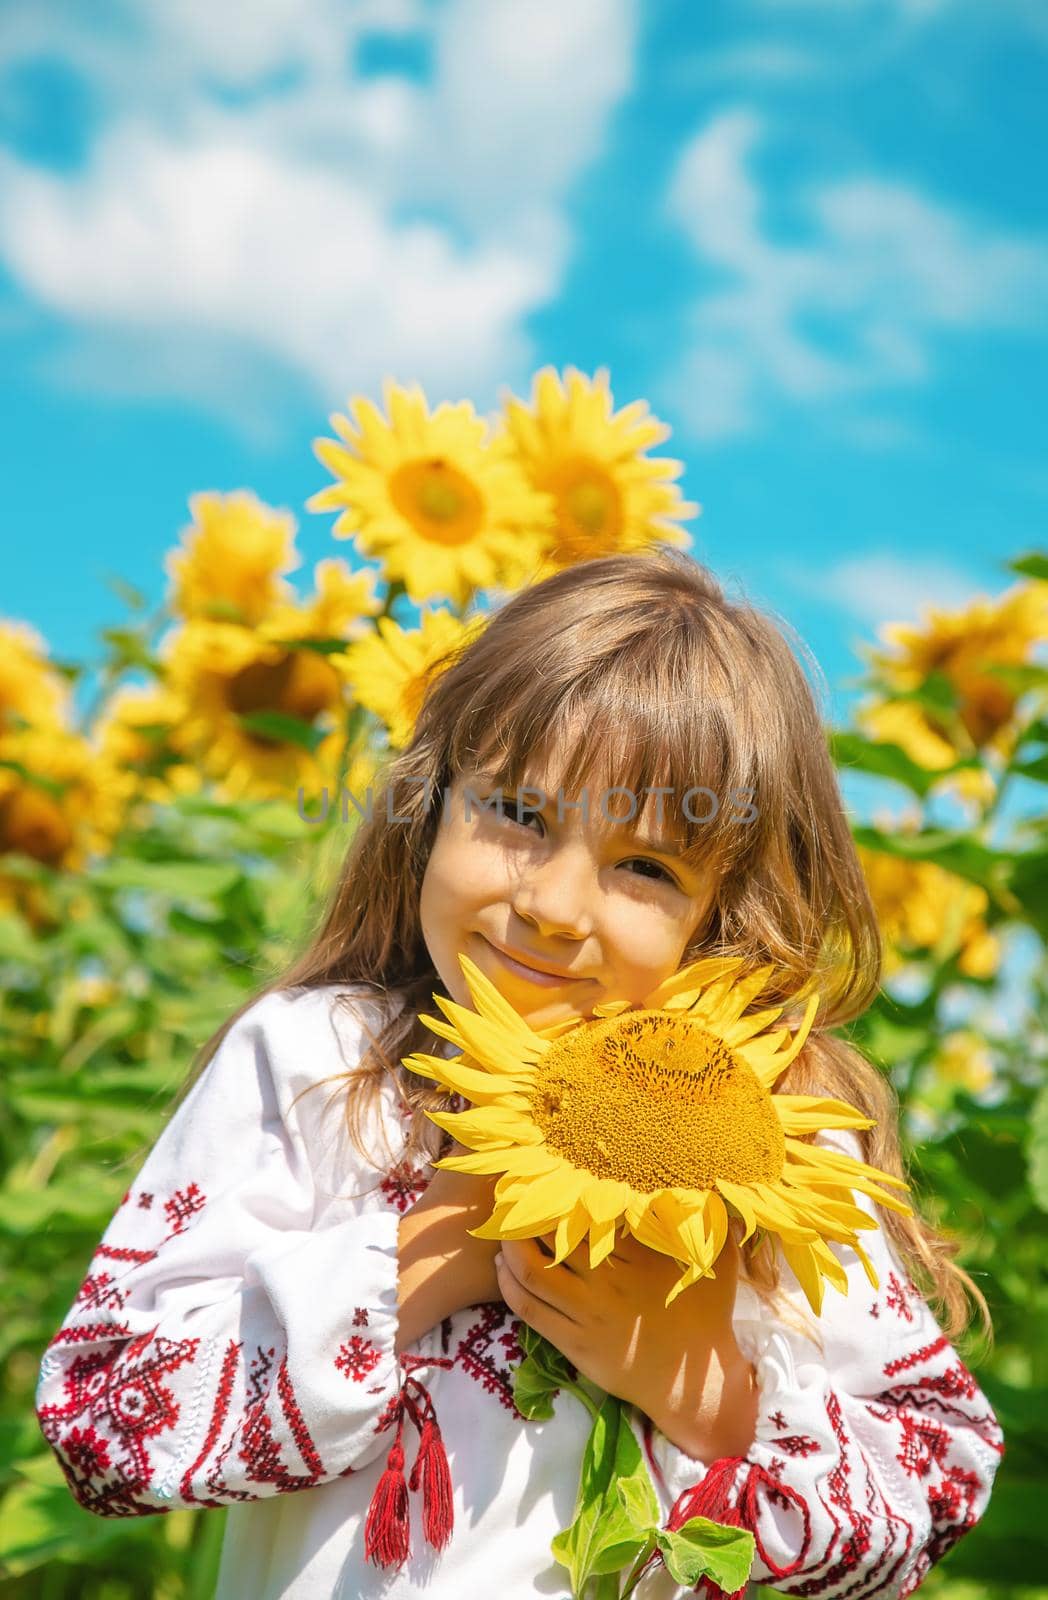 A child in a field of sunflowers in an embroidered shirt. Ukrainian. Selective focus.